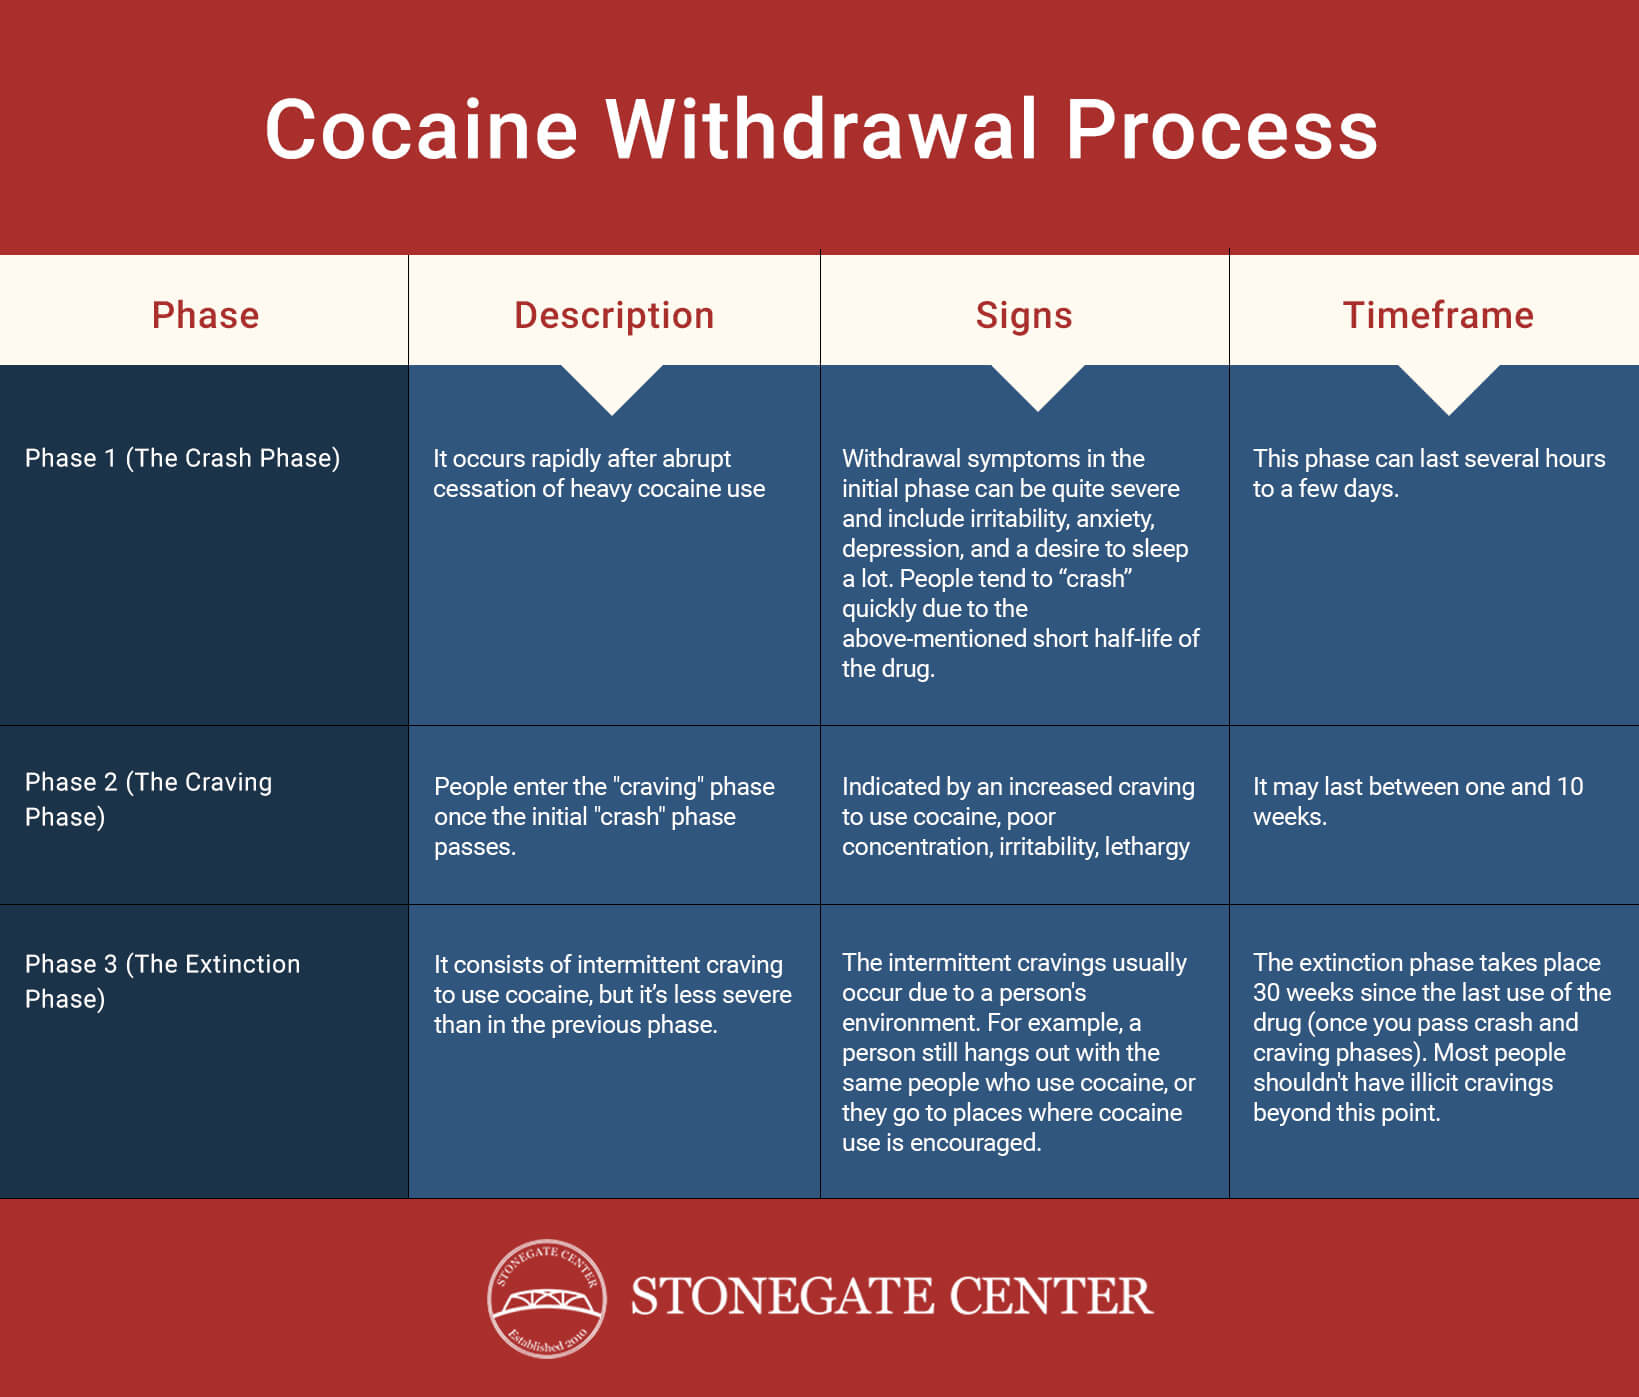 Stonegate Center Blog - Everything You Need to Know About Medical Detox - Cocaine Withdrawal Process